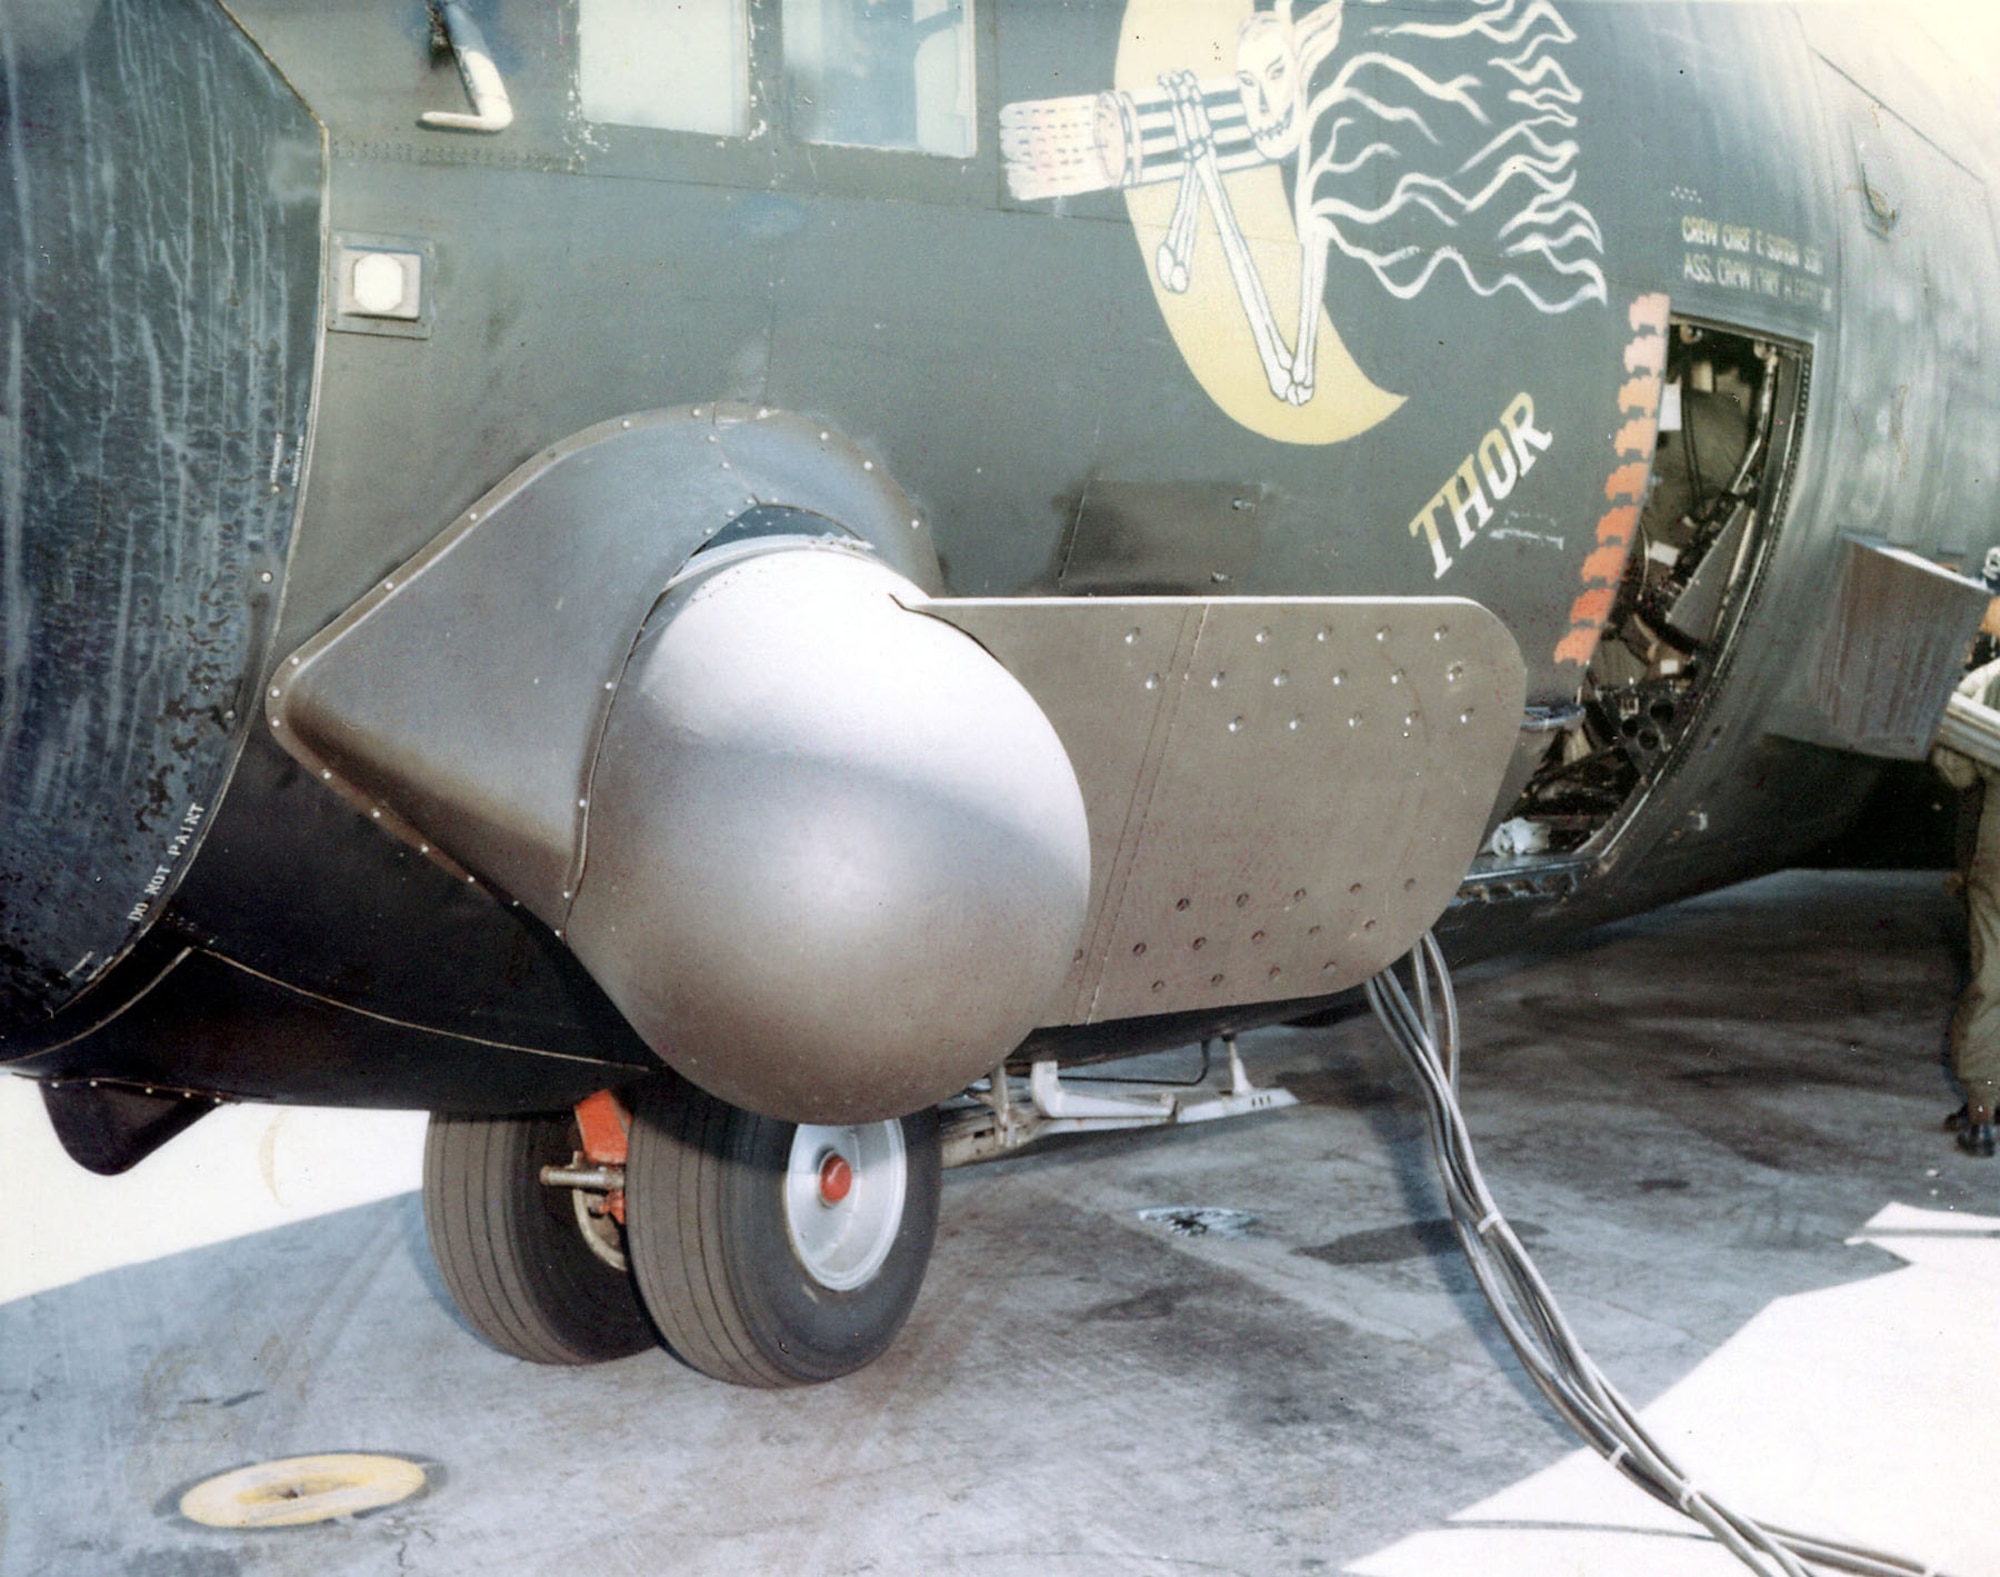 “Black Crow” sensor on Thor, an AC-130A. This sensor detected and tracked vehicles by the electrical impulses of their spark plugs. Thor was shot down by antiaircraft fire in December 1972, with the loss of 14 members of its 16 crew. (U.S. Air Force photo)